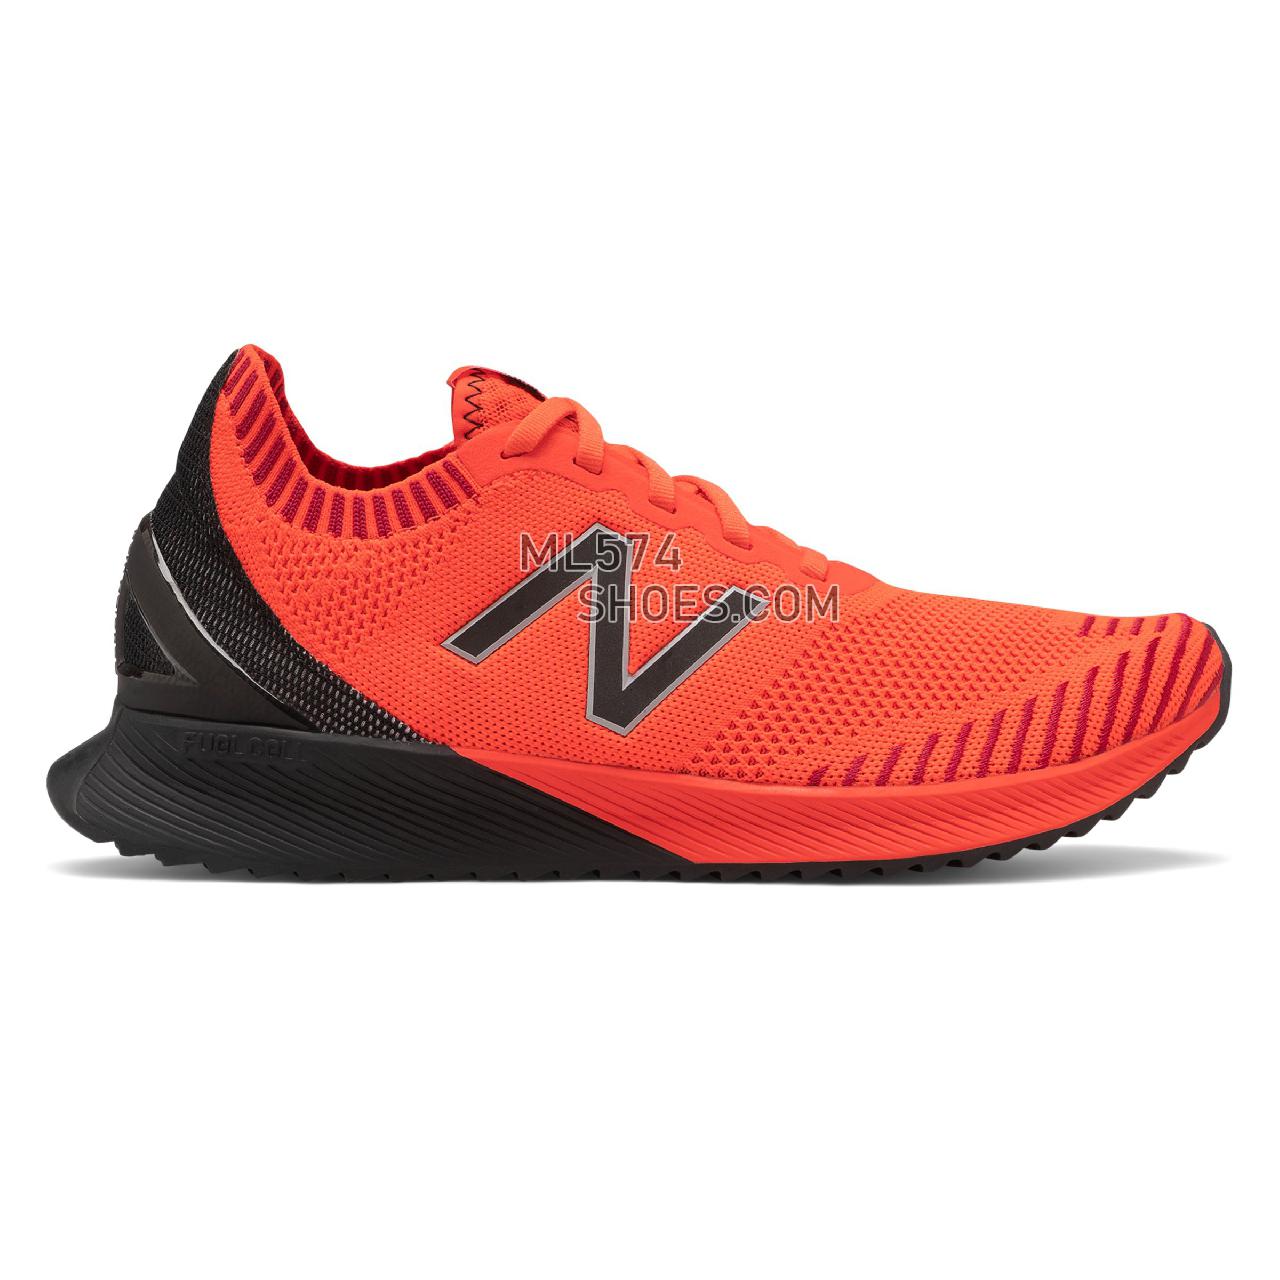 New Balance FuelCell Echo - Men's Neutral Running - Neo Flame with Black - MFCECCR